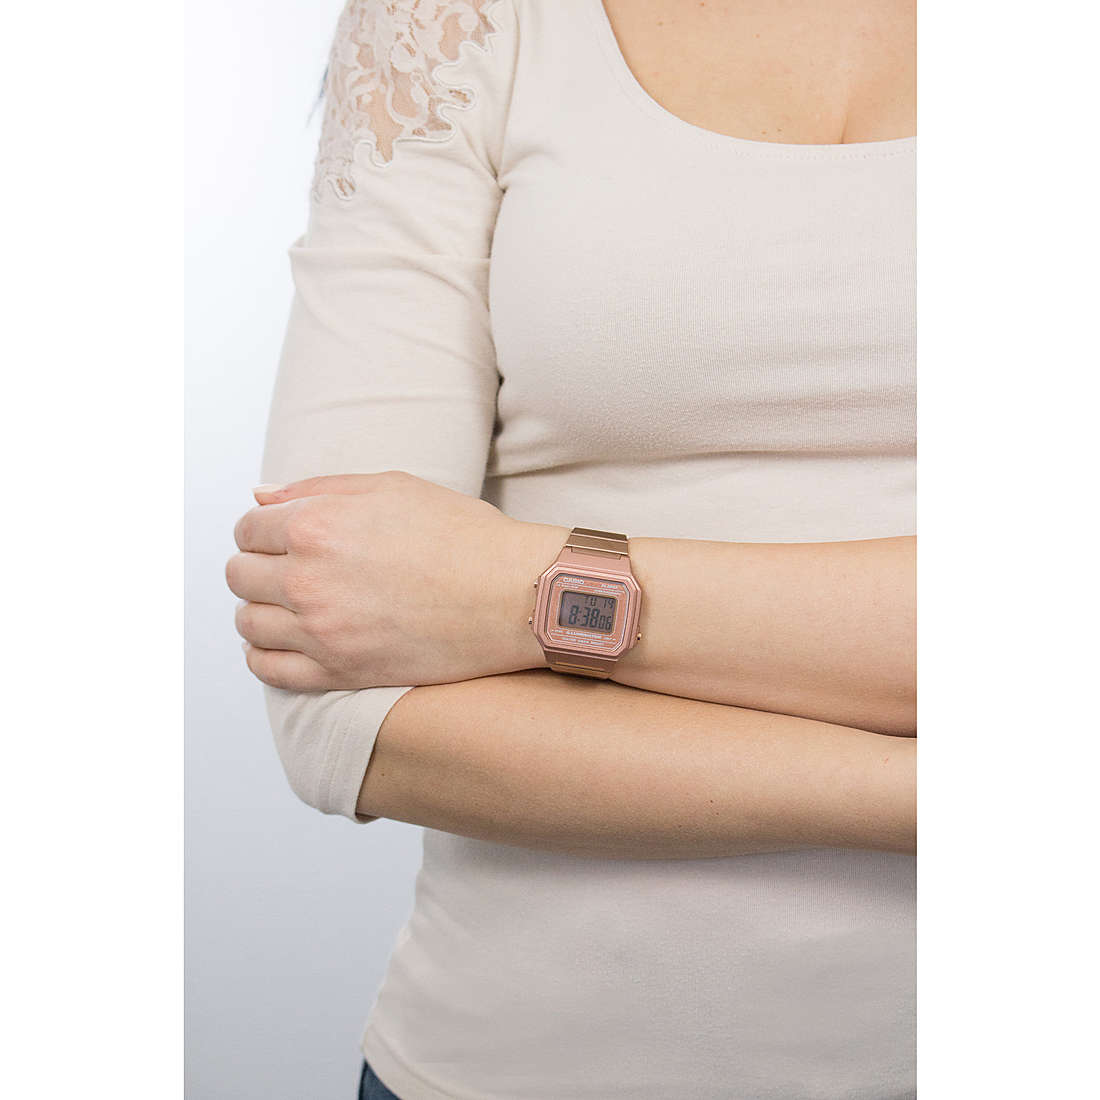 Casio digitals Collection woman B650WC-5AEF wearing